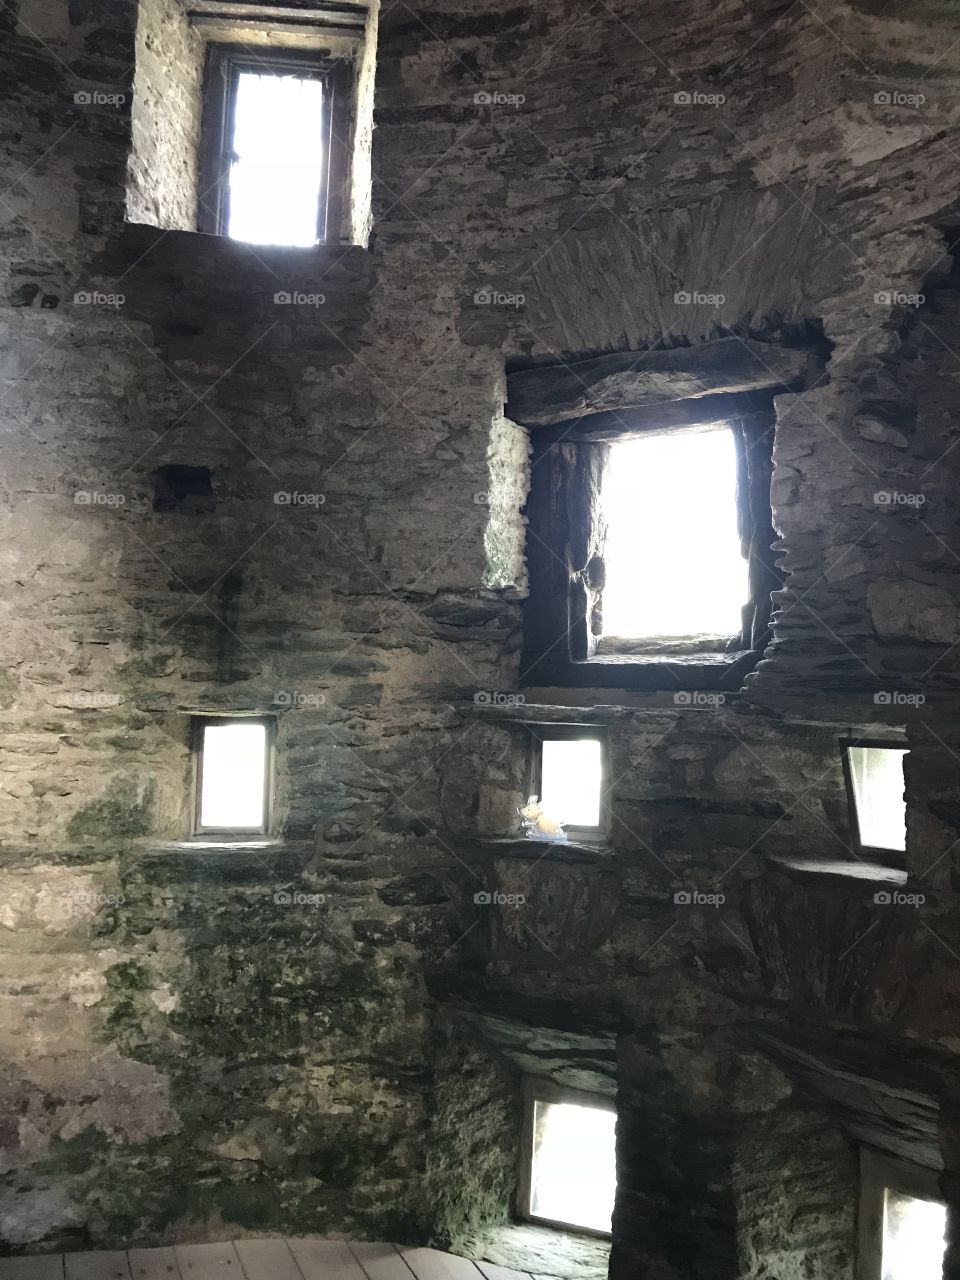 Inside Dartmouth Castle where soldiers had many bolt holes to assist them in defending their positions against the enemy.